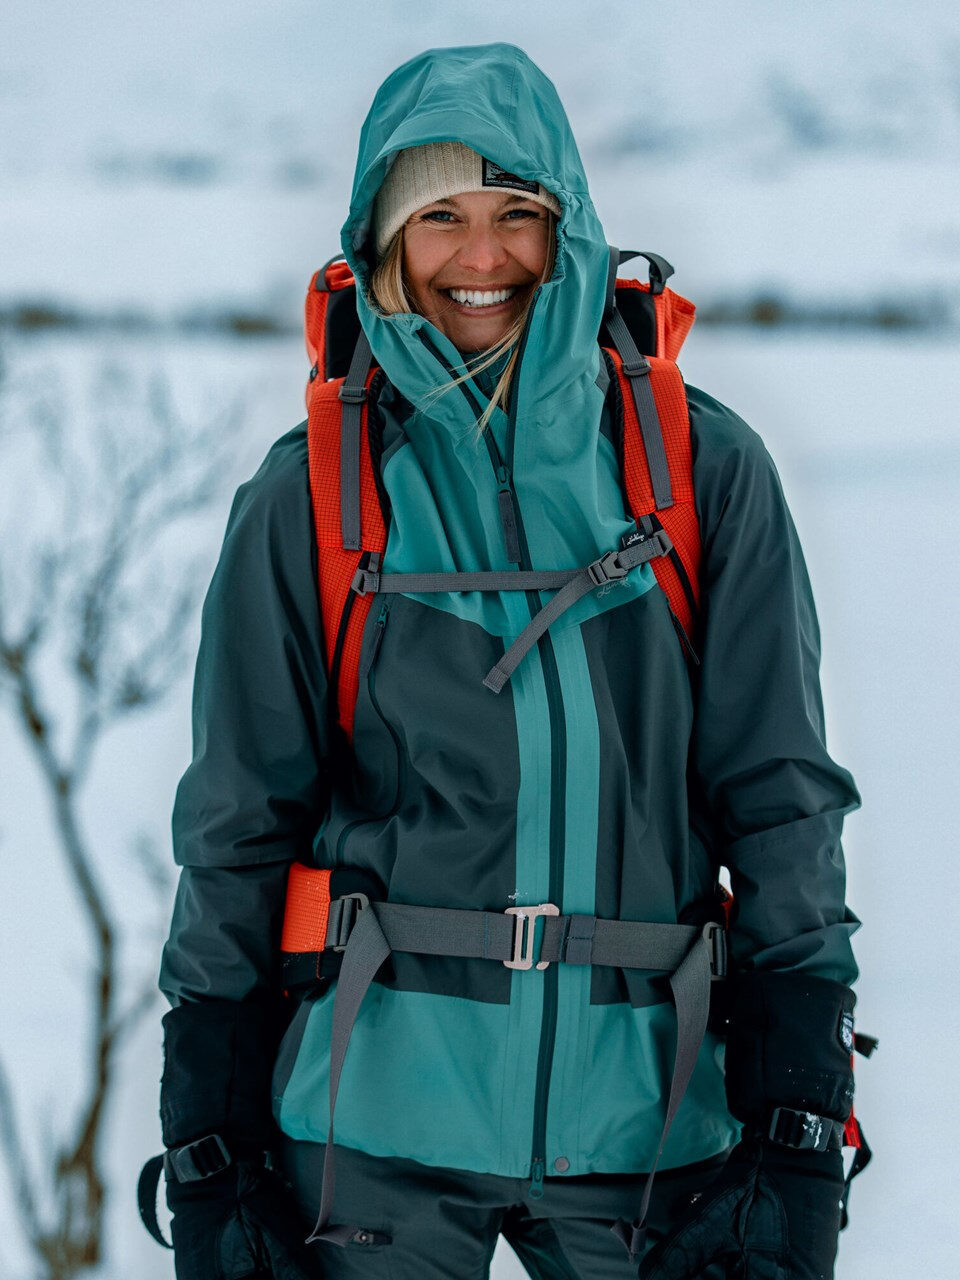 A woman in a ski jacket smiling in the snow.